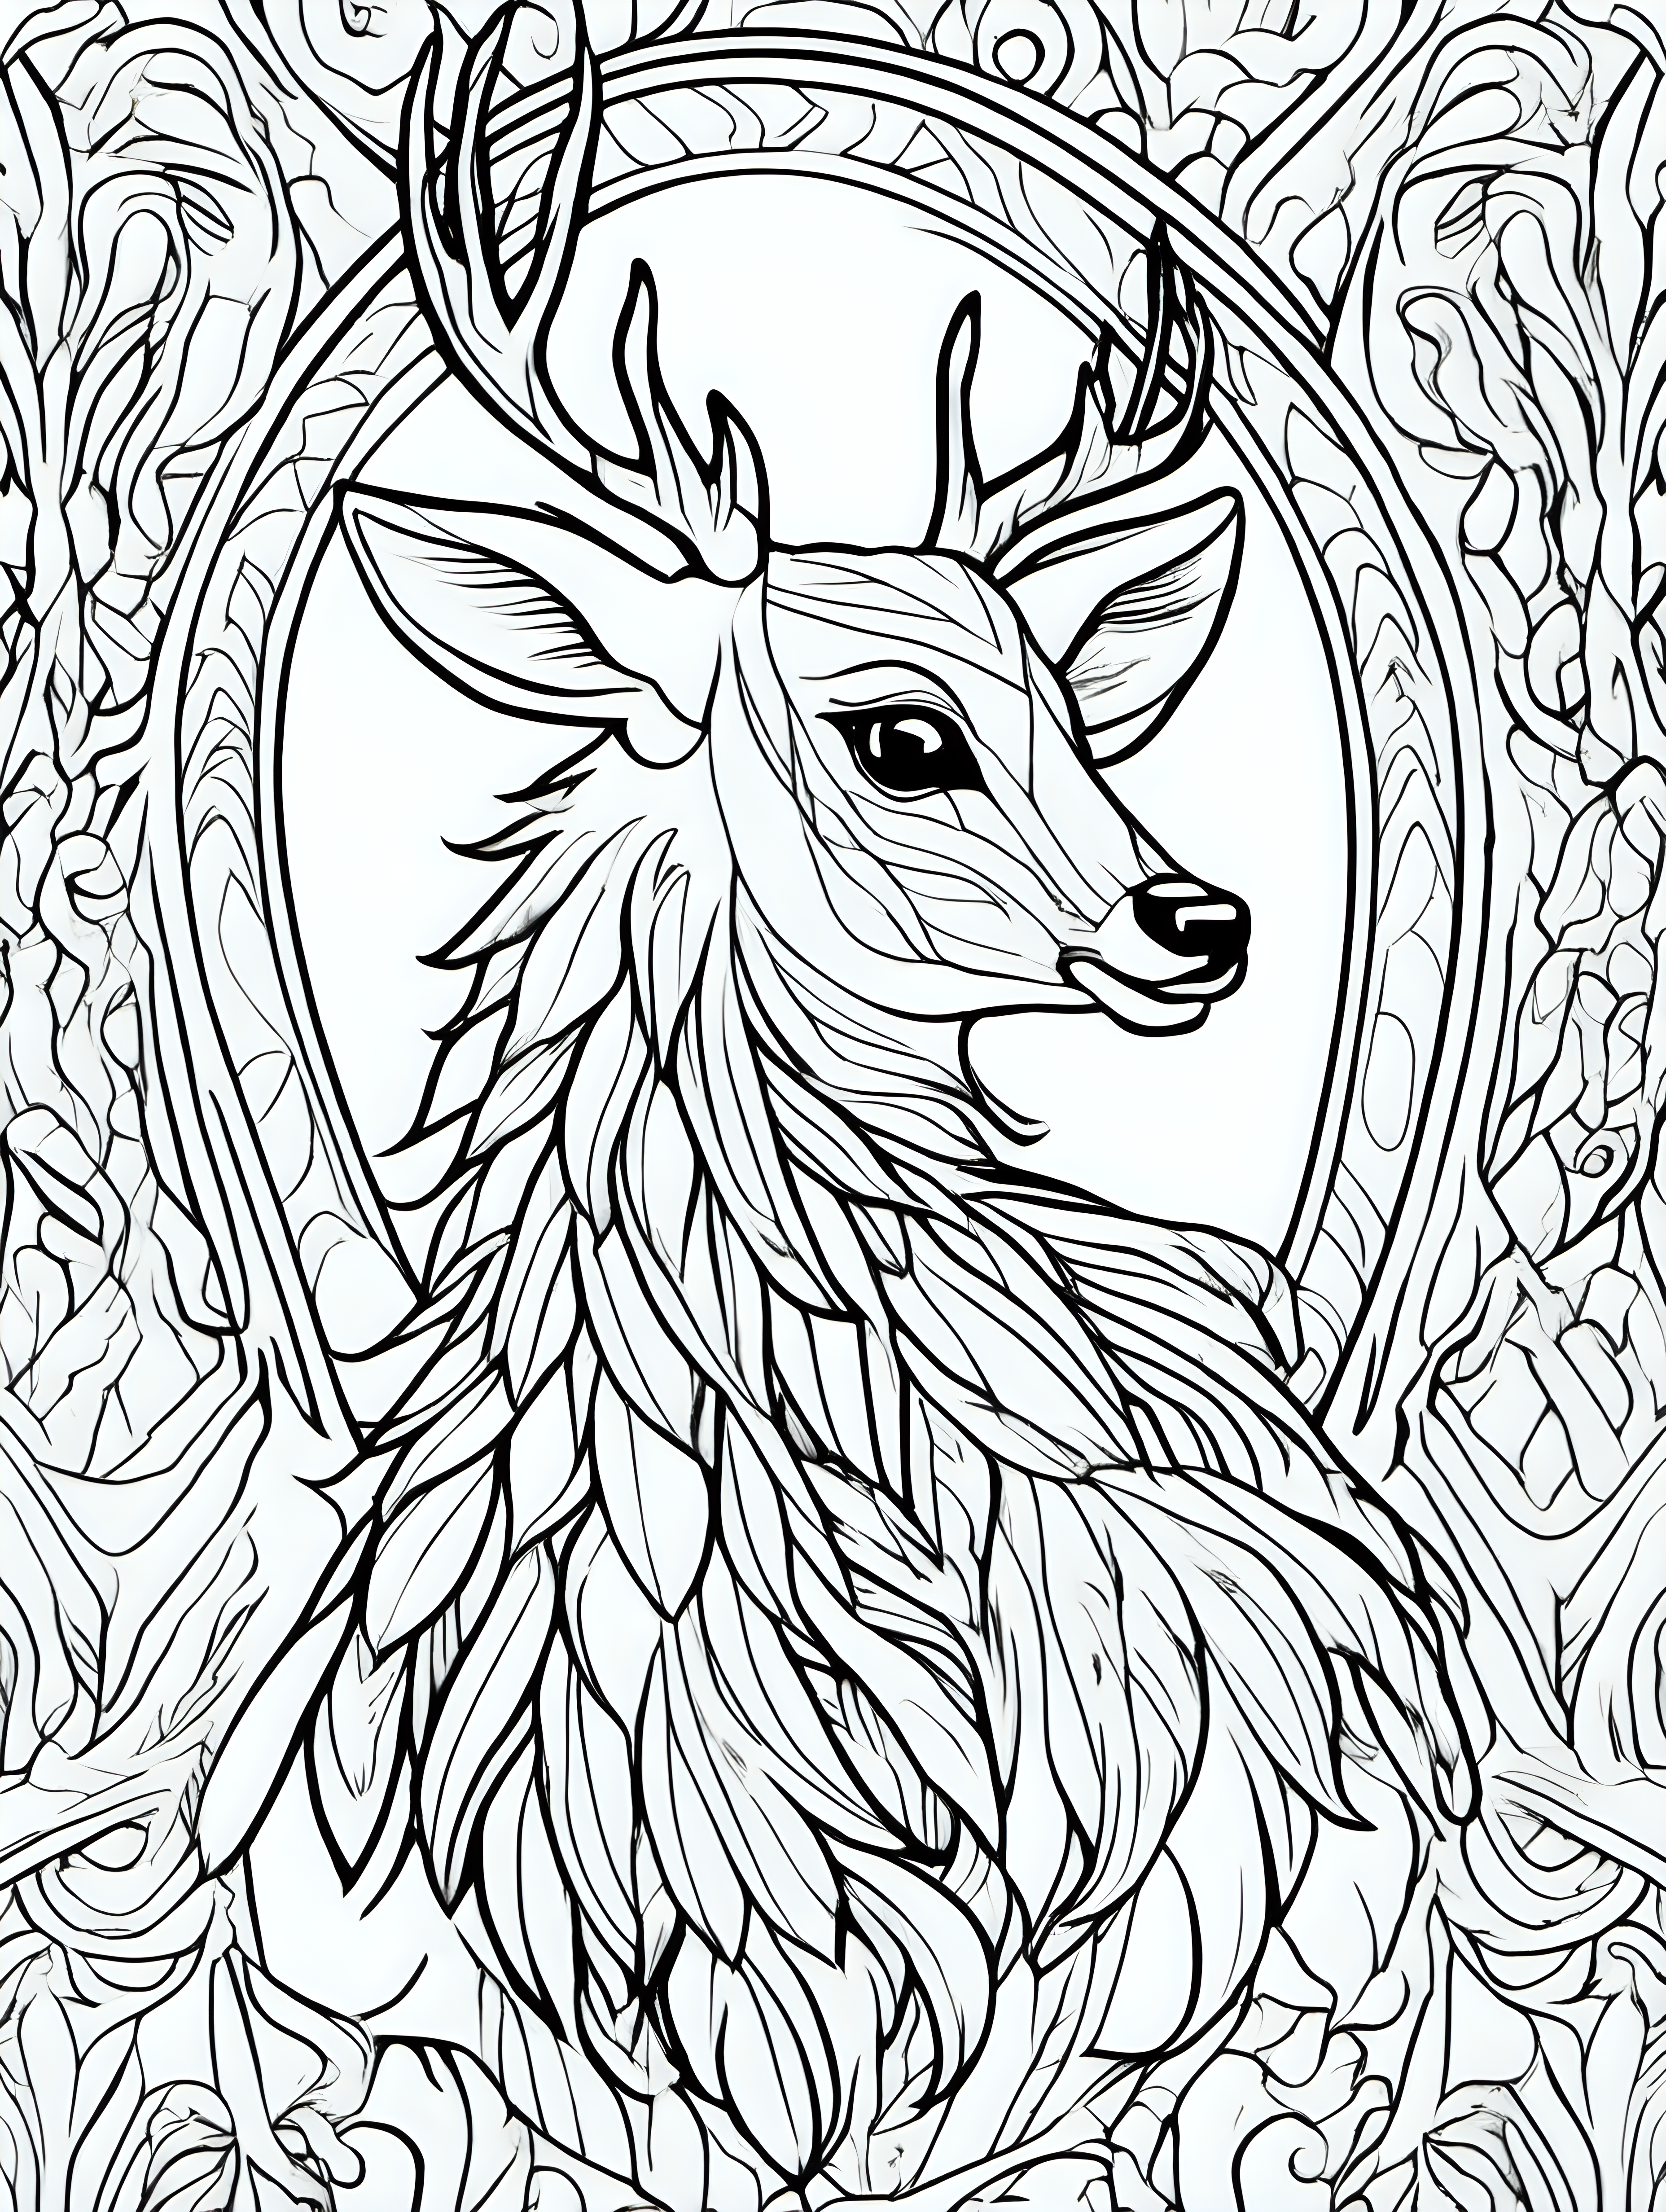 fawn feather patterns ,coloring page, simple draw, no colors, 